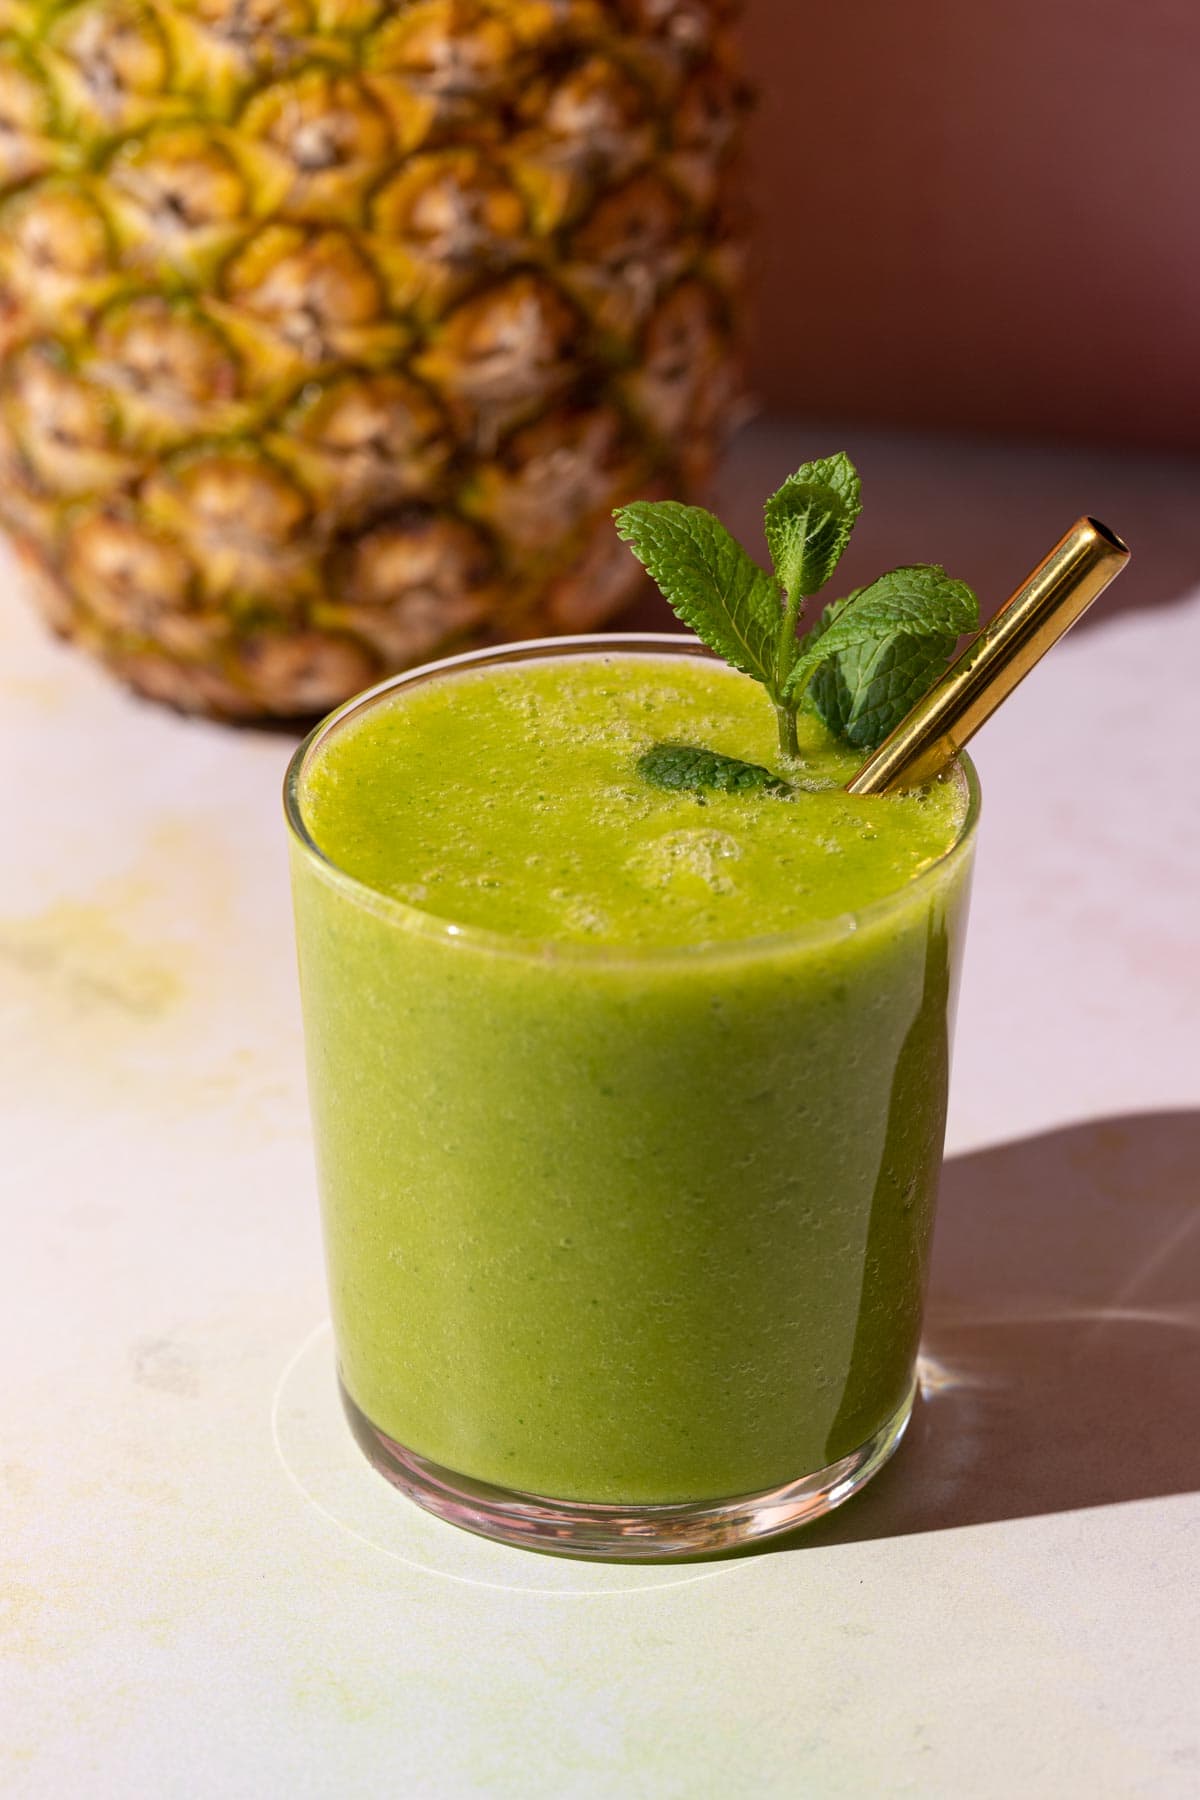 Mango Pineapple Kale Smoothie with a mint sprig in the glass on a colorful background with a pineapple